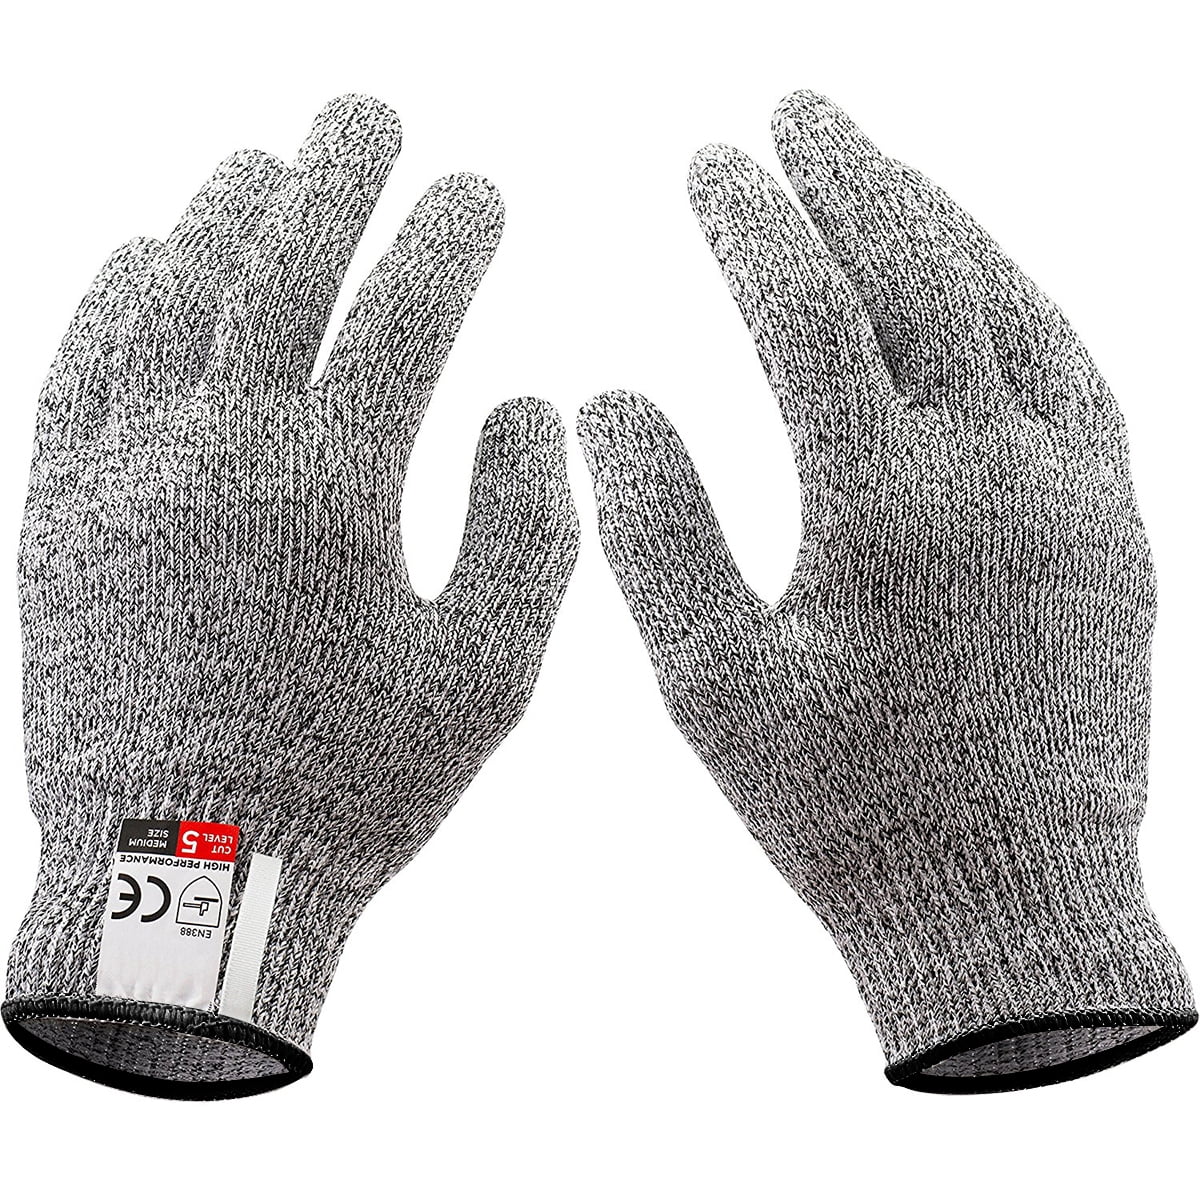 Pair Safety Level 5 Cut Proof Stab Resistant Grip Protection Work Gloves XXL 